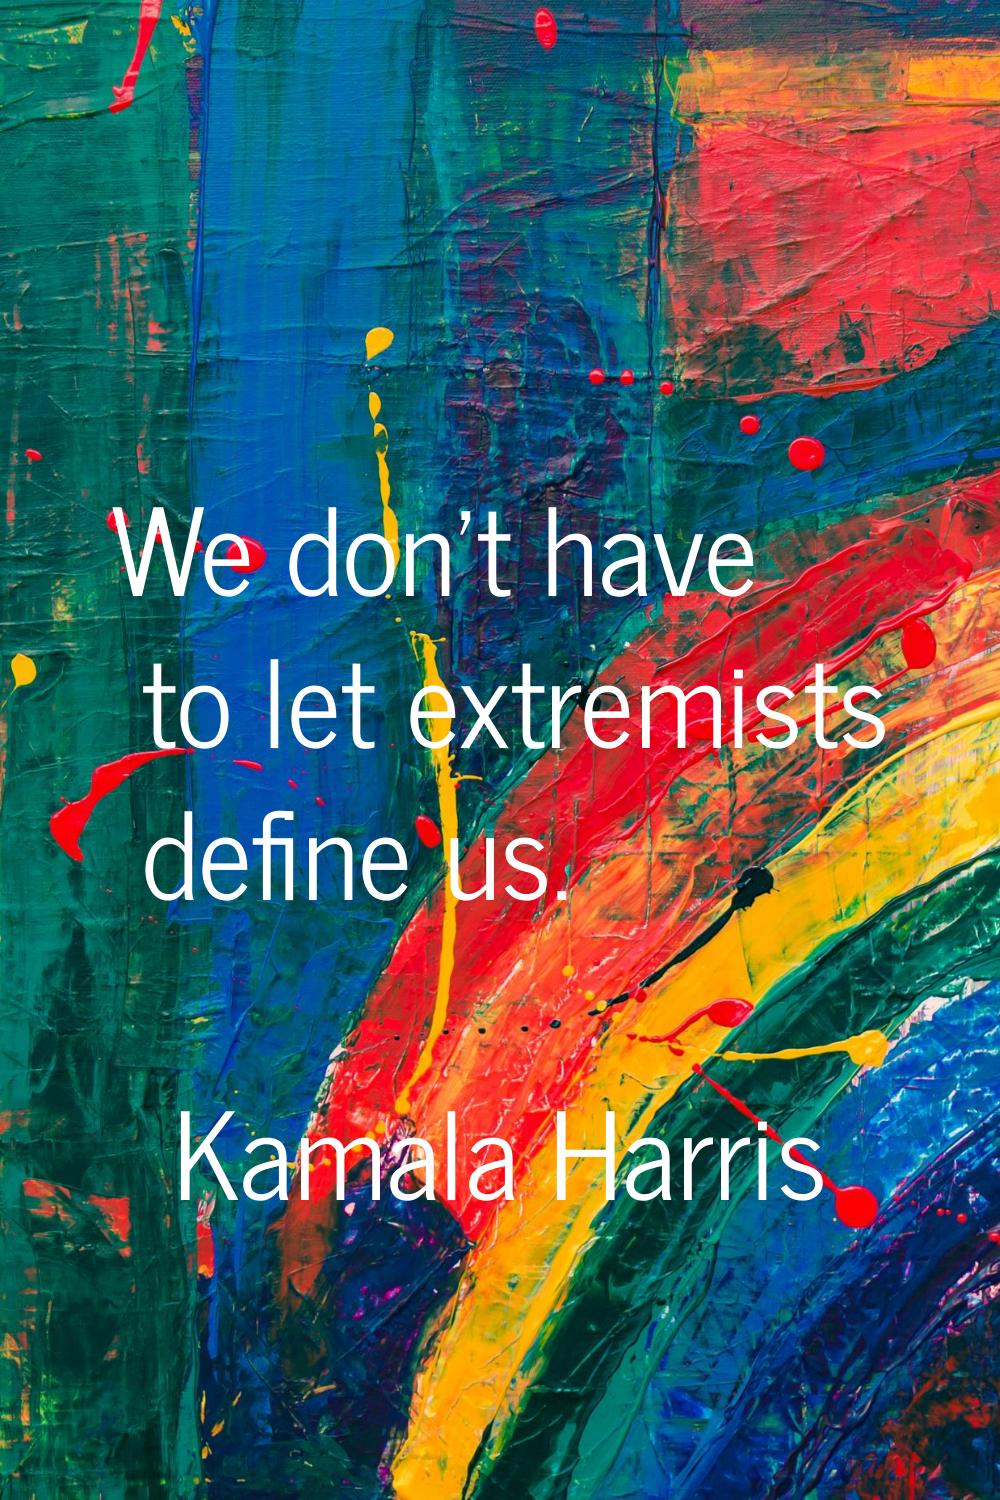 We don't have to let extremists define us.